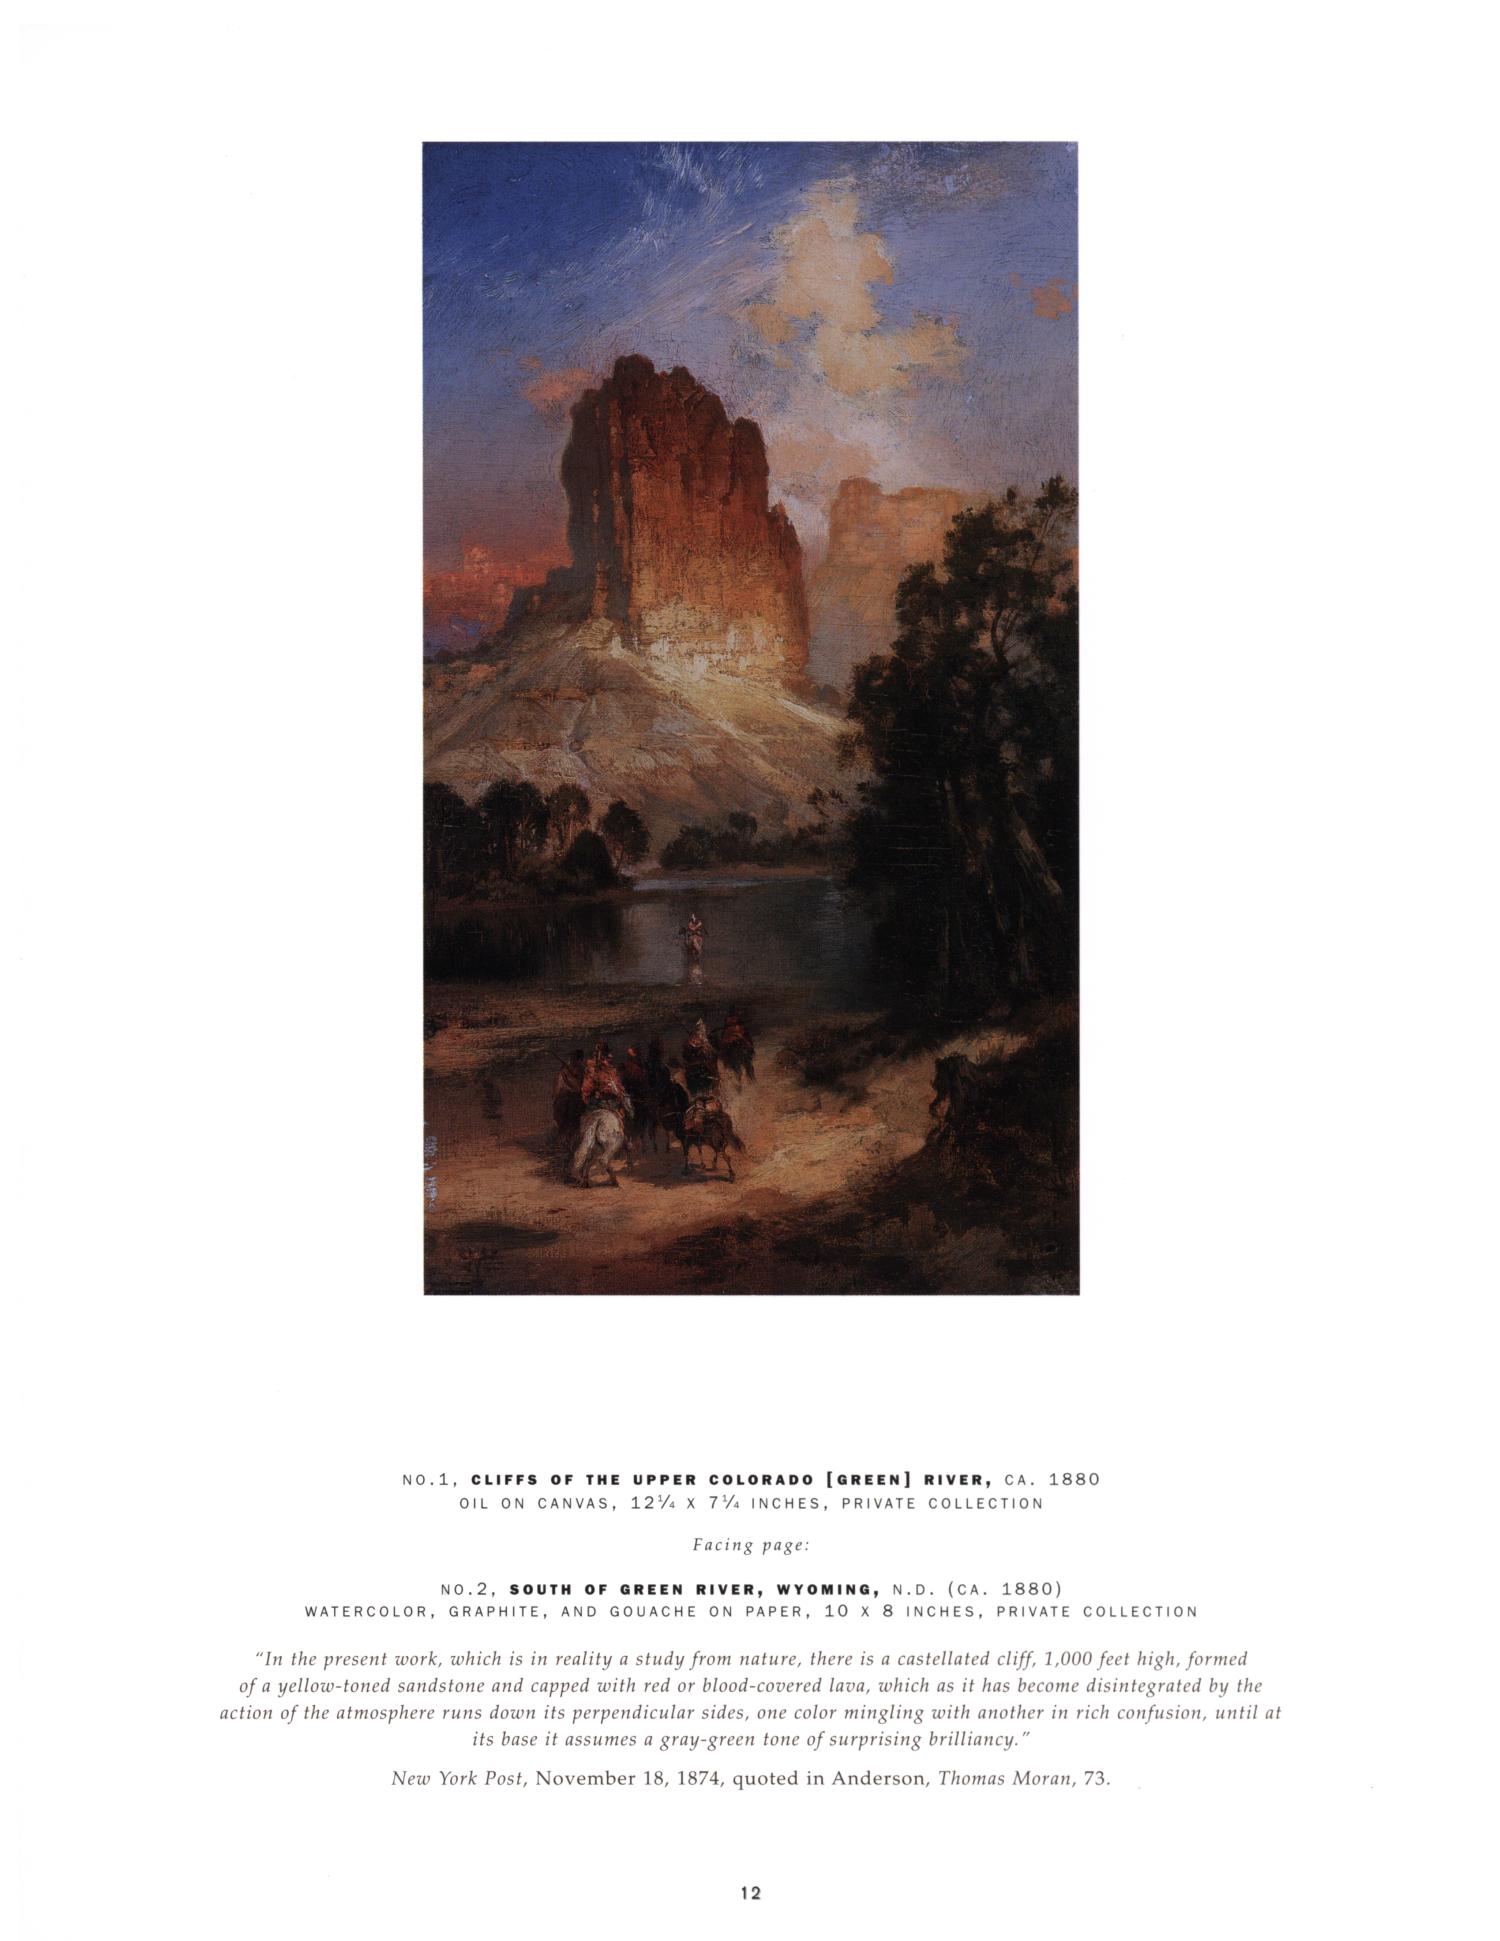 Thomas Moran and the Spirit of Place
                                                
                                                    12
                                                